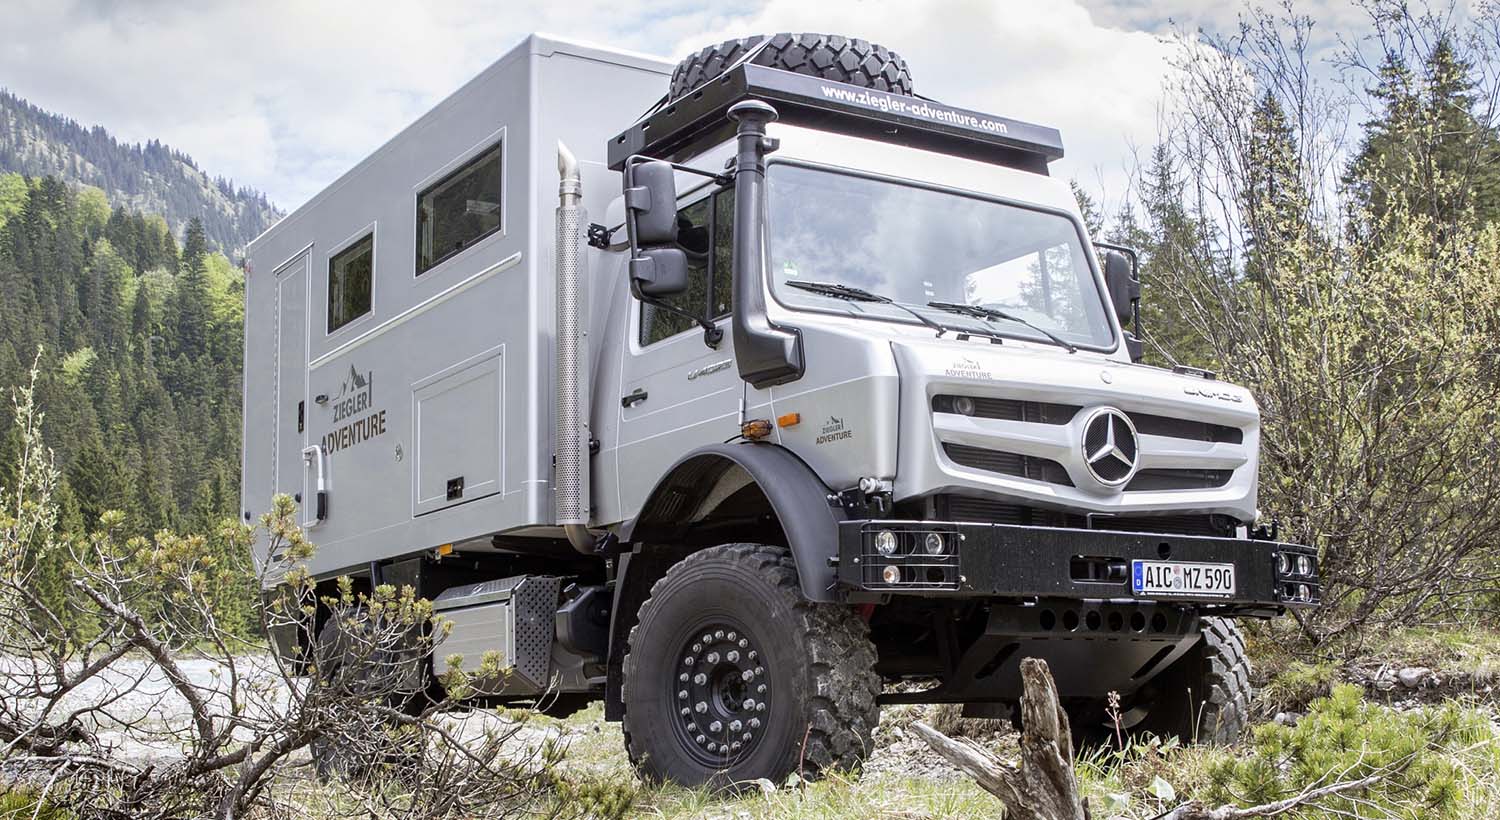 Unimog is the “Off-Road Vehicle of the Year” for the 17th time